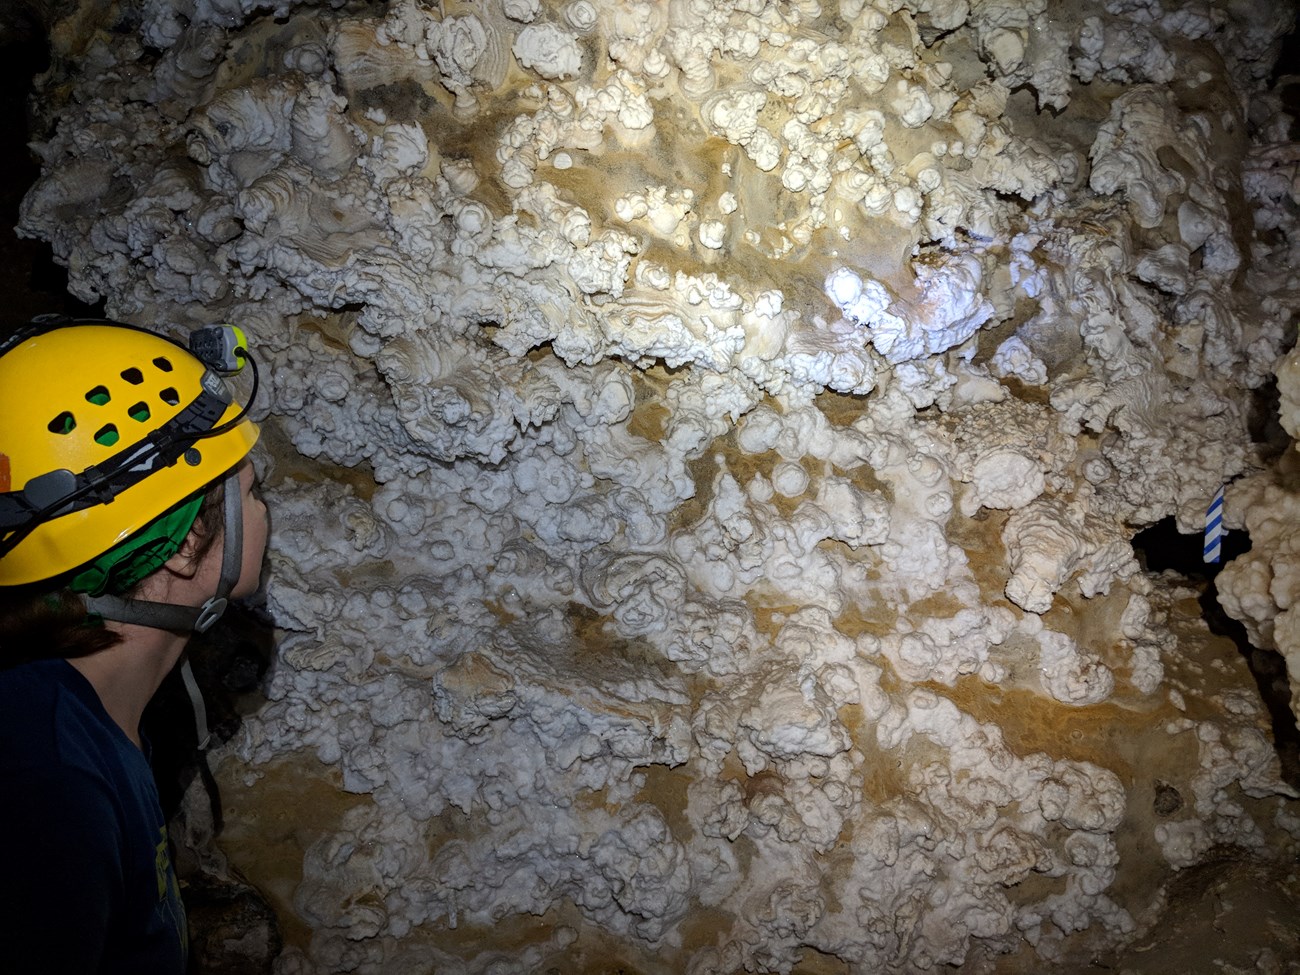 a person wearing a climbing helmet examines crystals on a cave wall